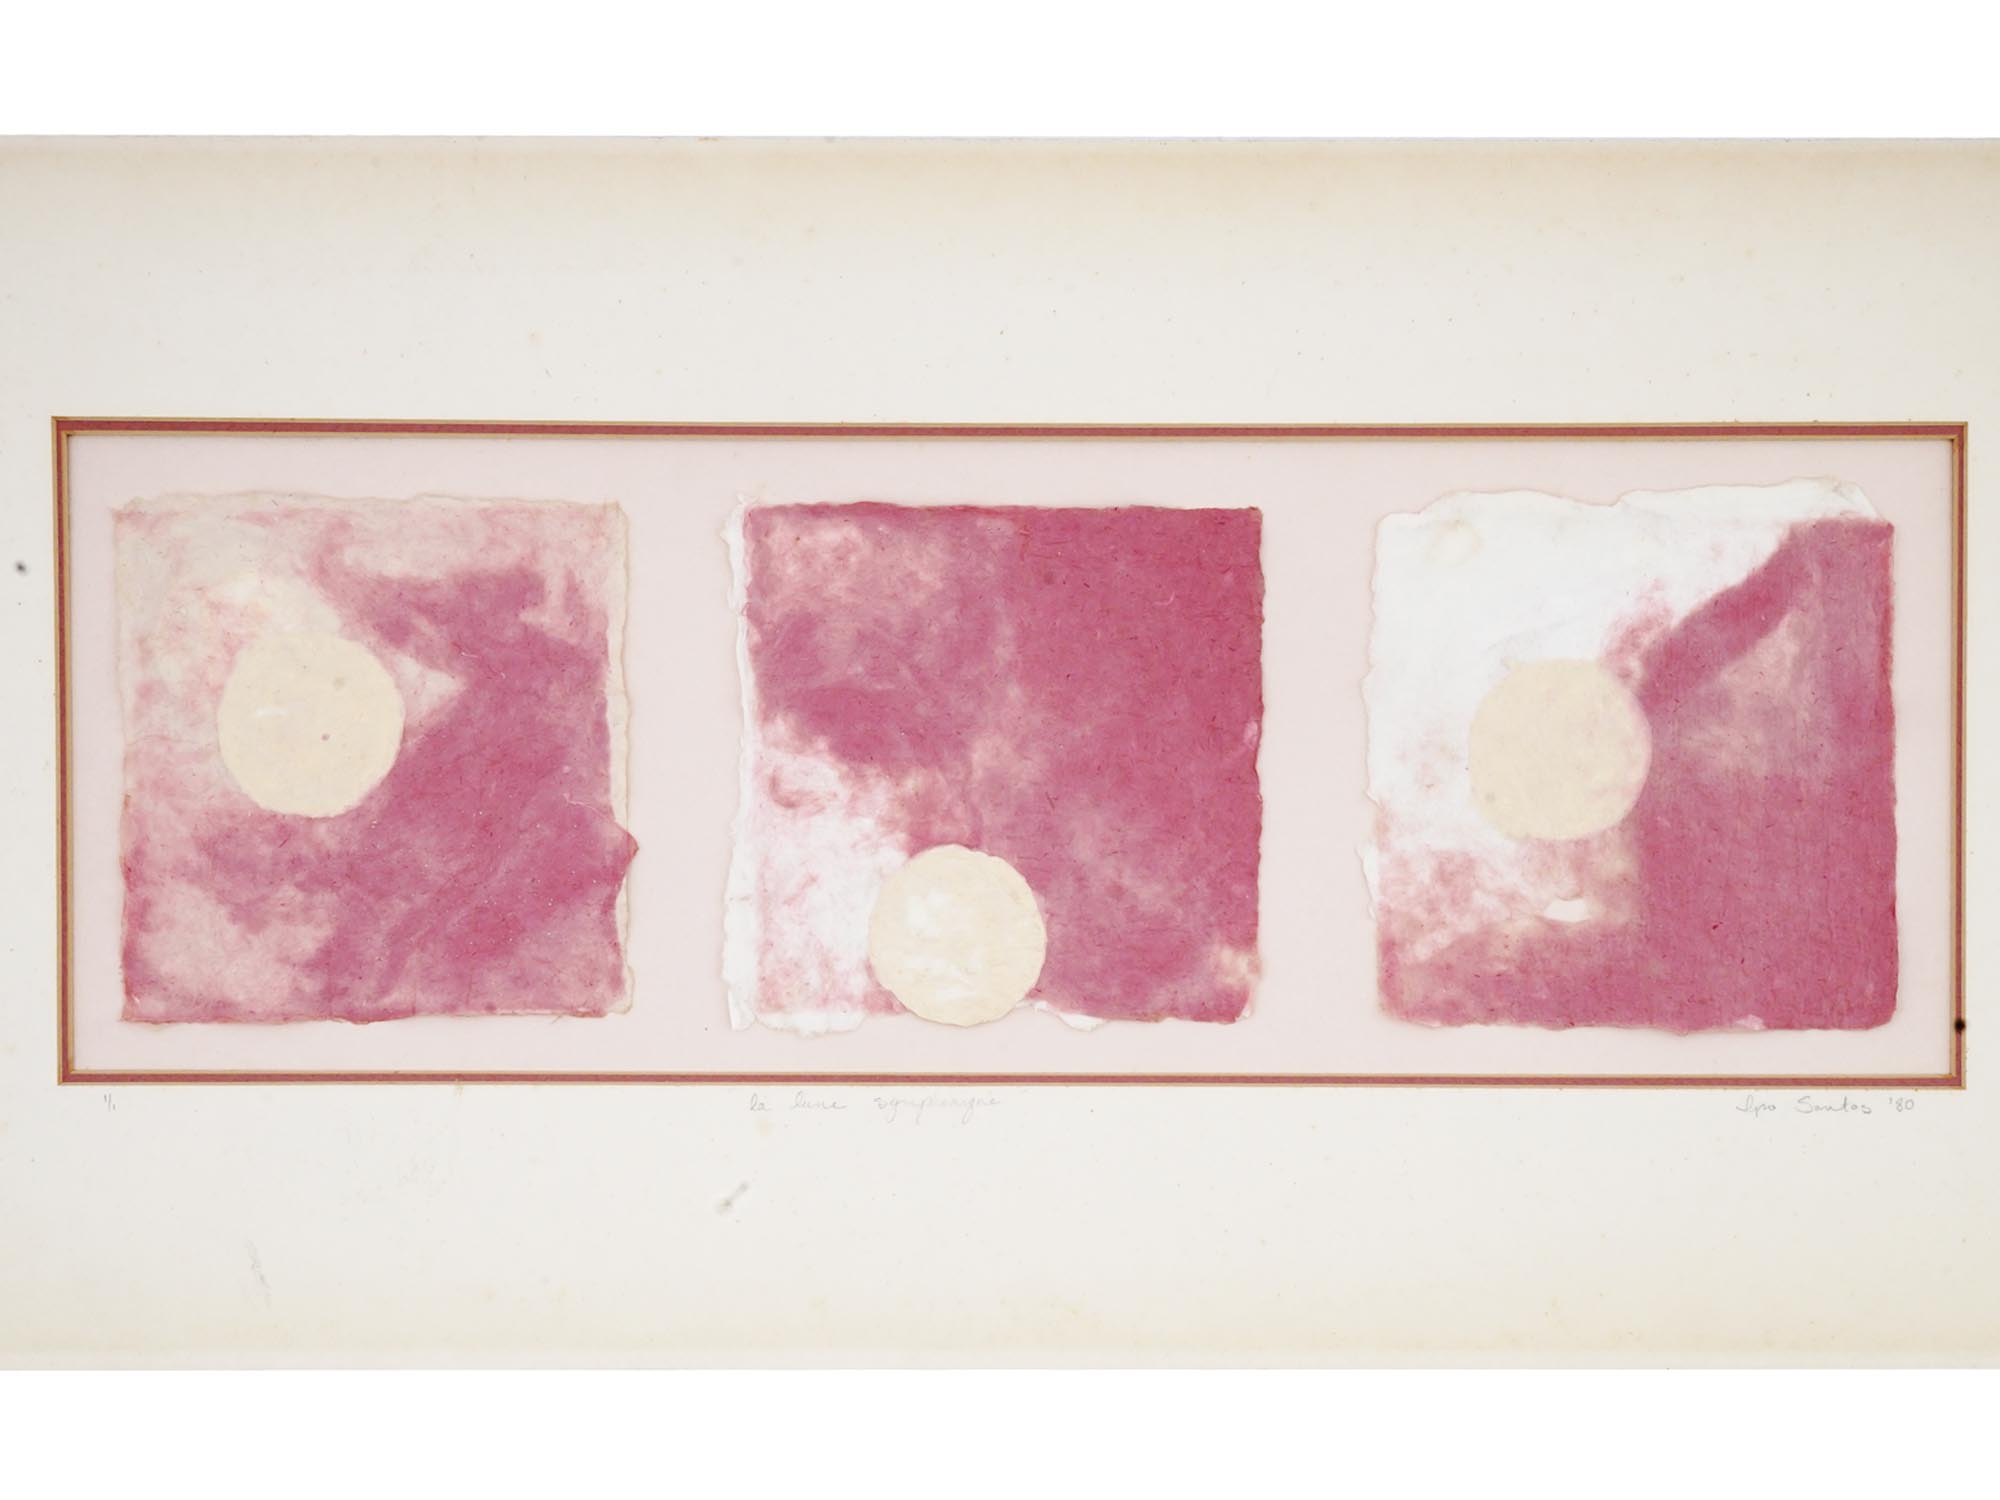 MOON TRIPTYCH MIXED MEDIA PAINTING BY IPO SANTOS PIC-1